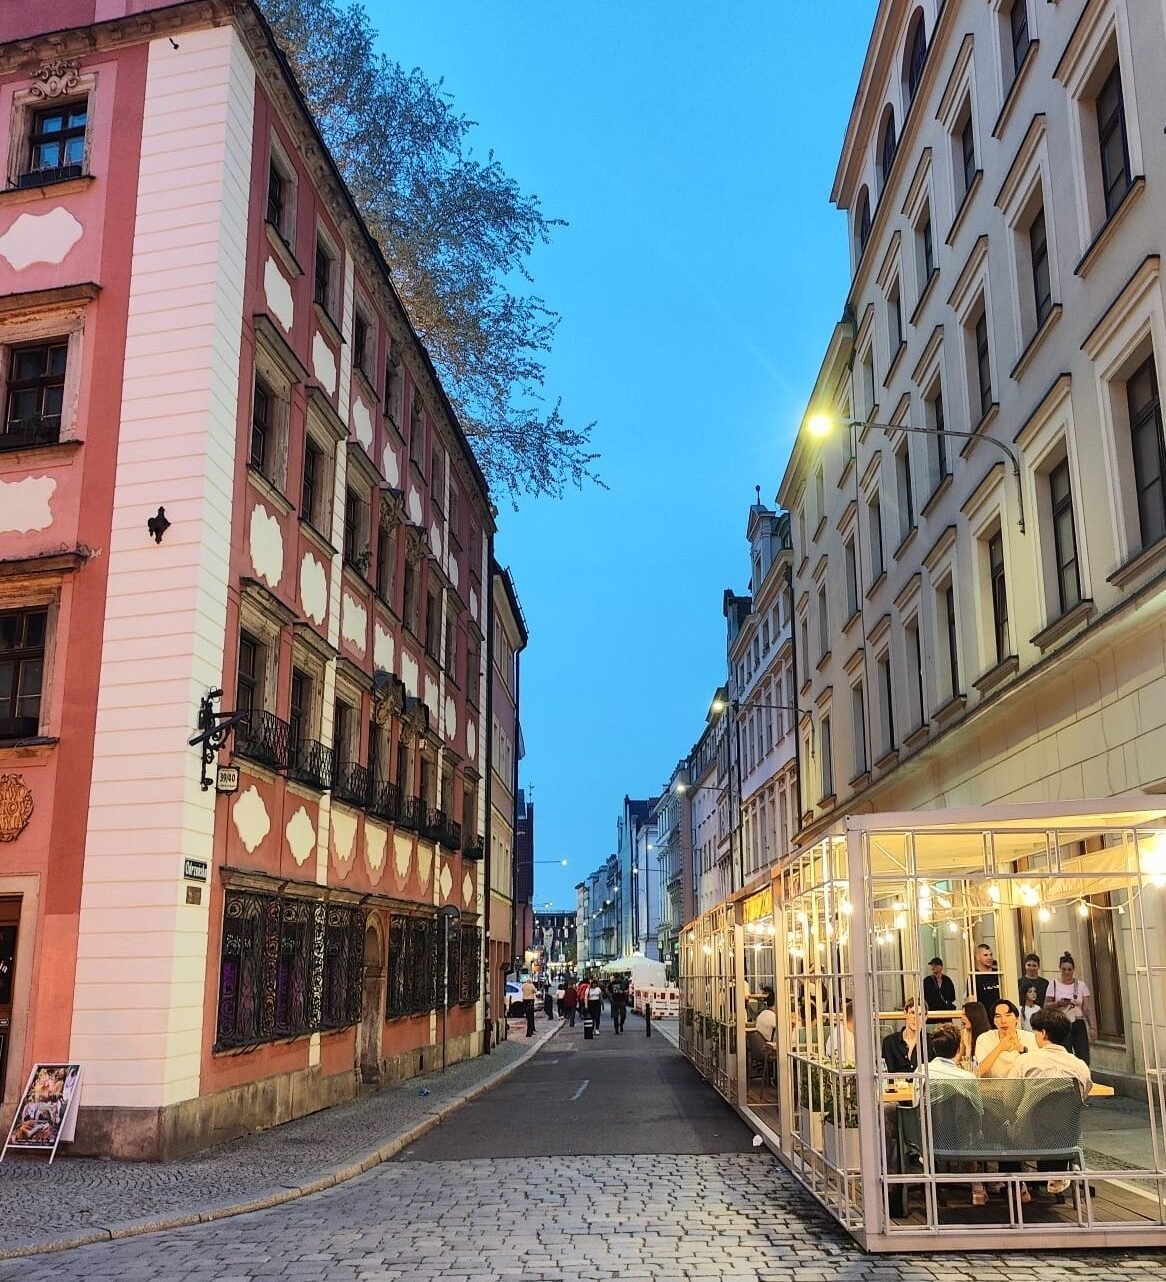 Odrzanska street, leading out from the market square and filled with great places to get food, drinks, or views. One of the 3 coolest streets in Wrocław.